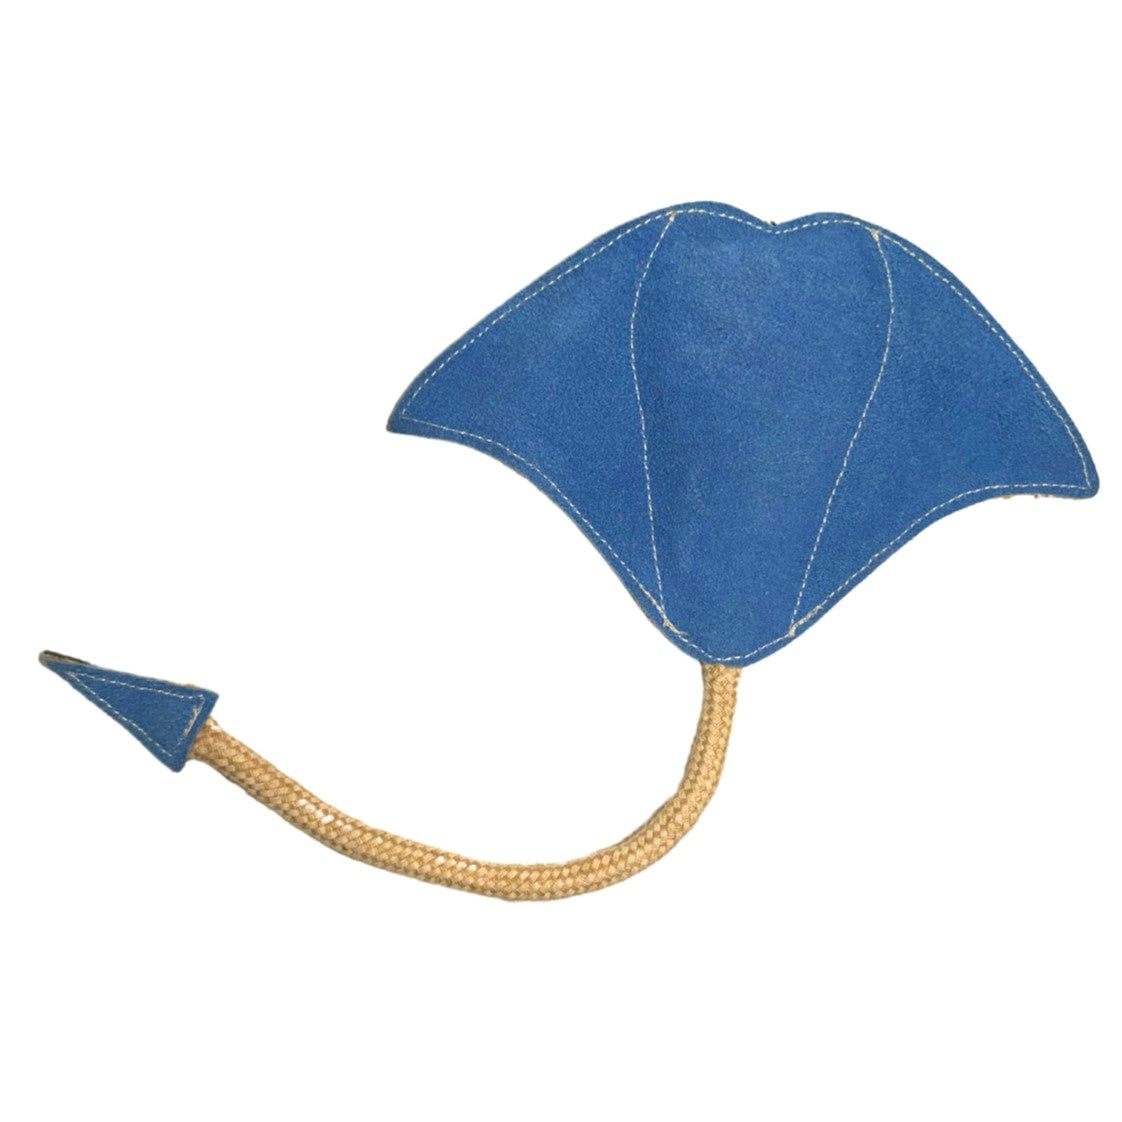 A toy resembling Simon the Stingray - navy with a buffalo suede cord for a tail, designed for playful interaction, possibly for pets, displayed against a white background by Georgie Paws.